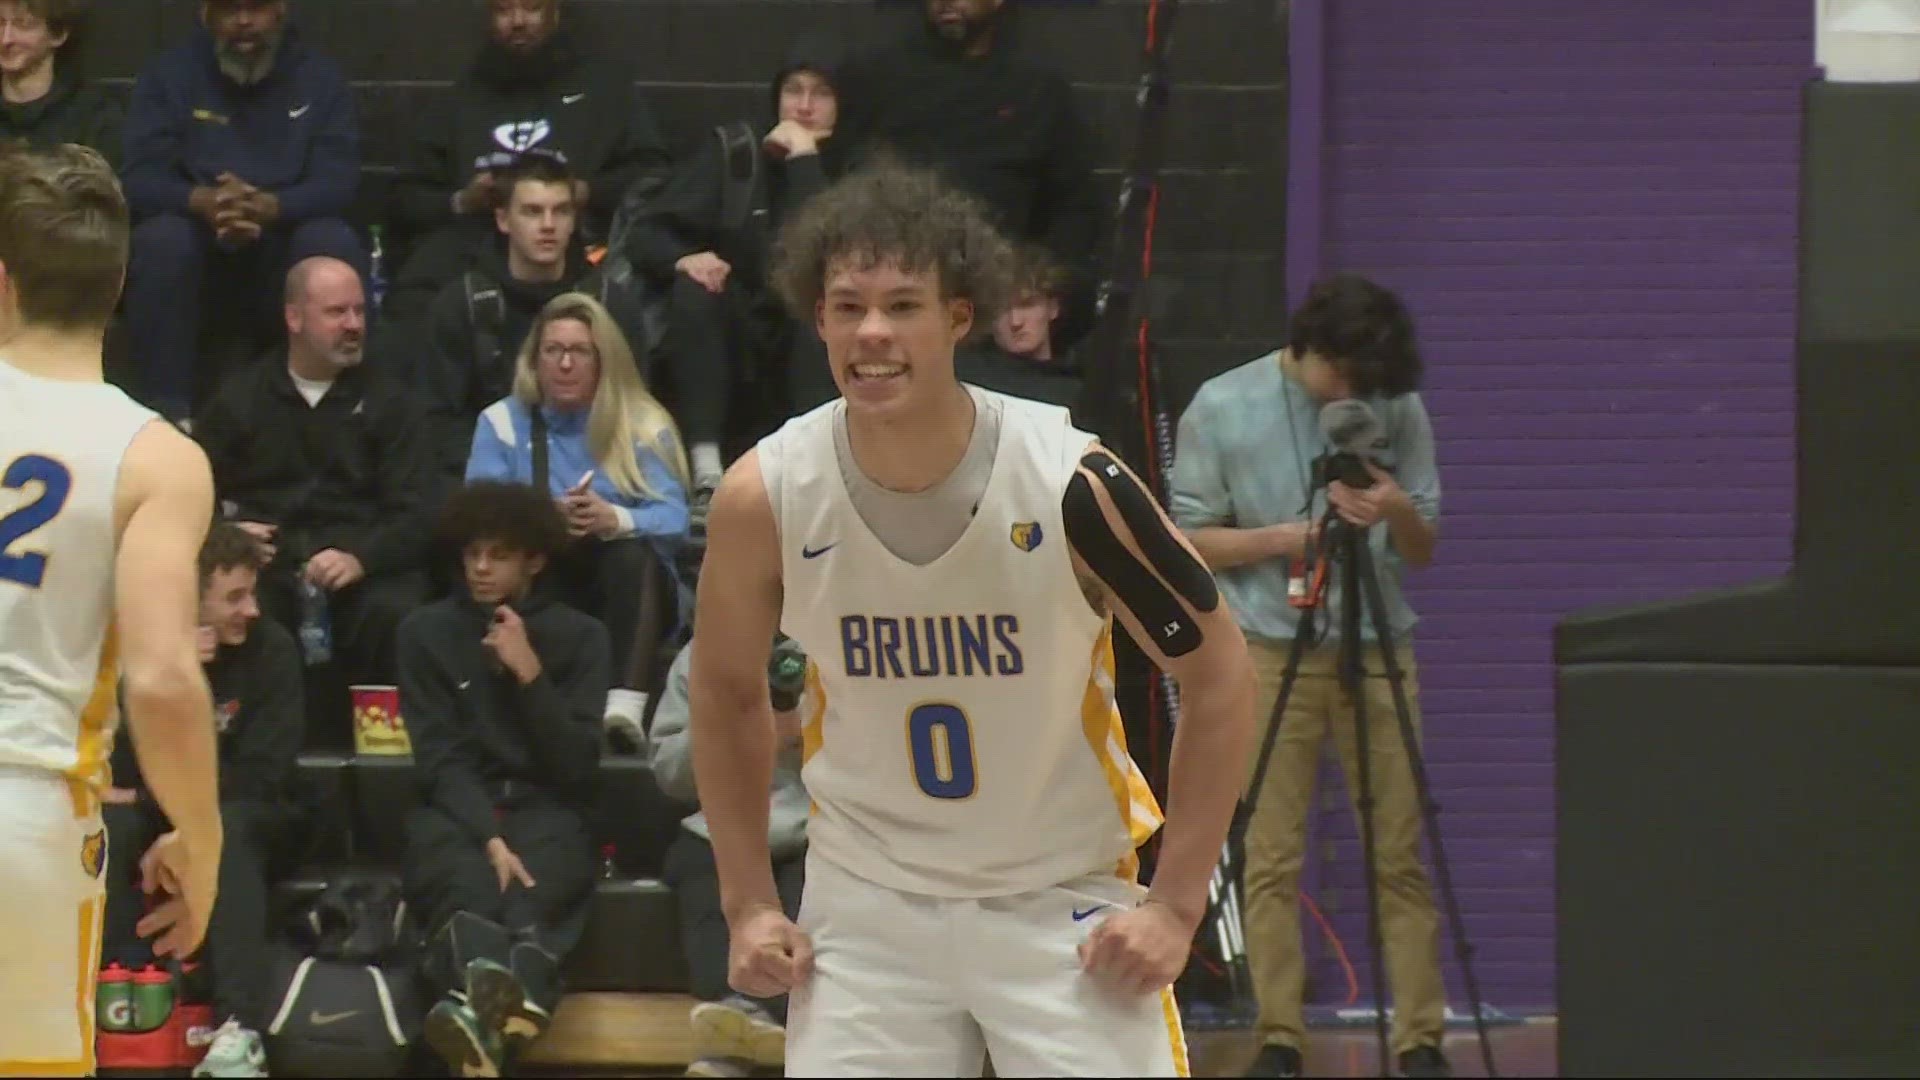 Barlow edged Mountainside 73-72 in 2OT, top seed West Linn held on against Central Catholic 49-45, Lincoln beat Gresham 60-59 Tualatin topped Beaverton 63-54.